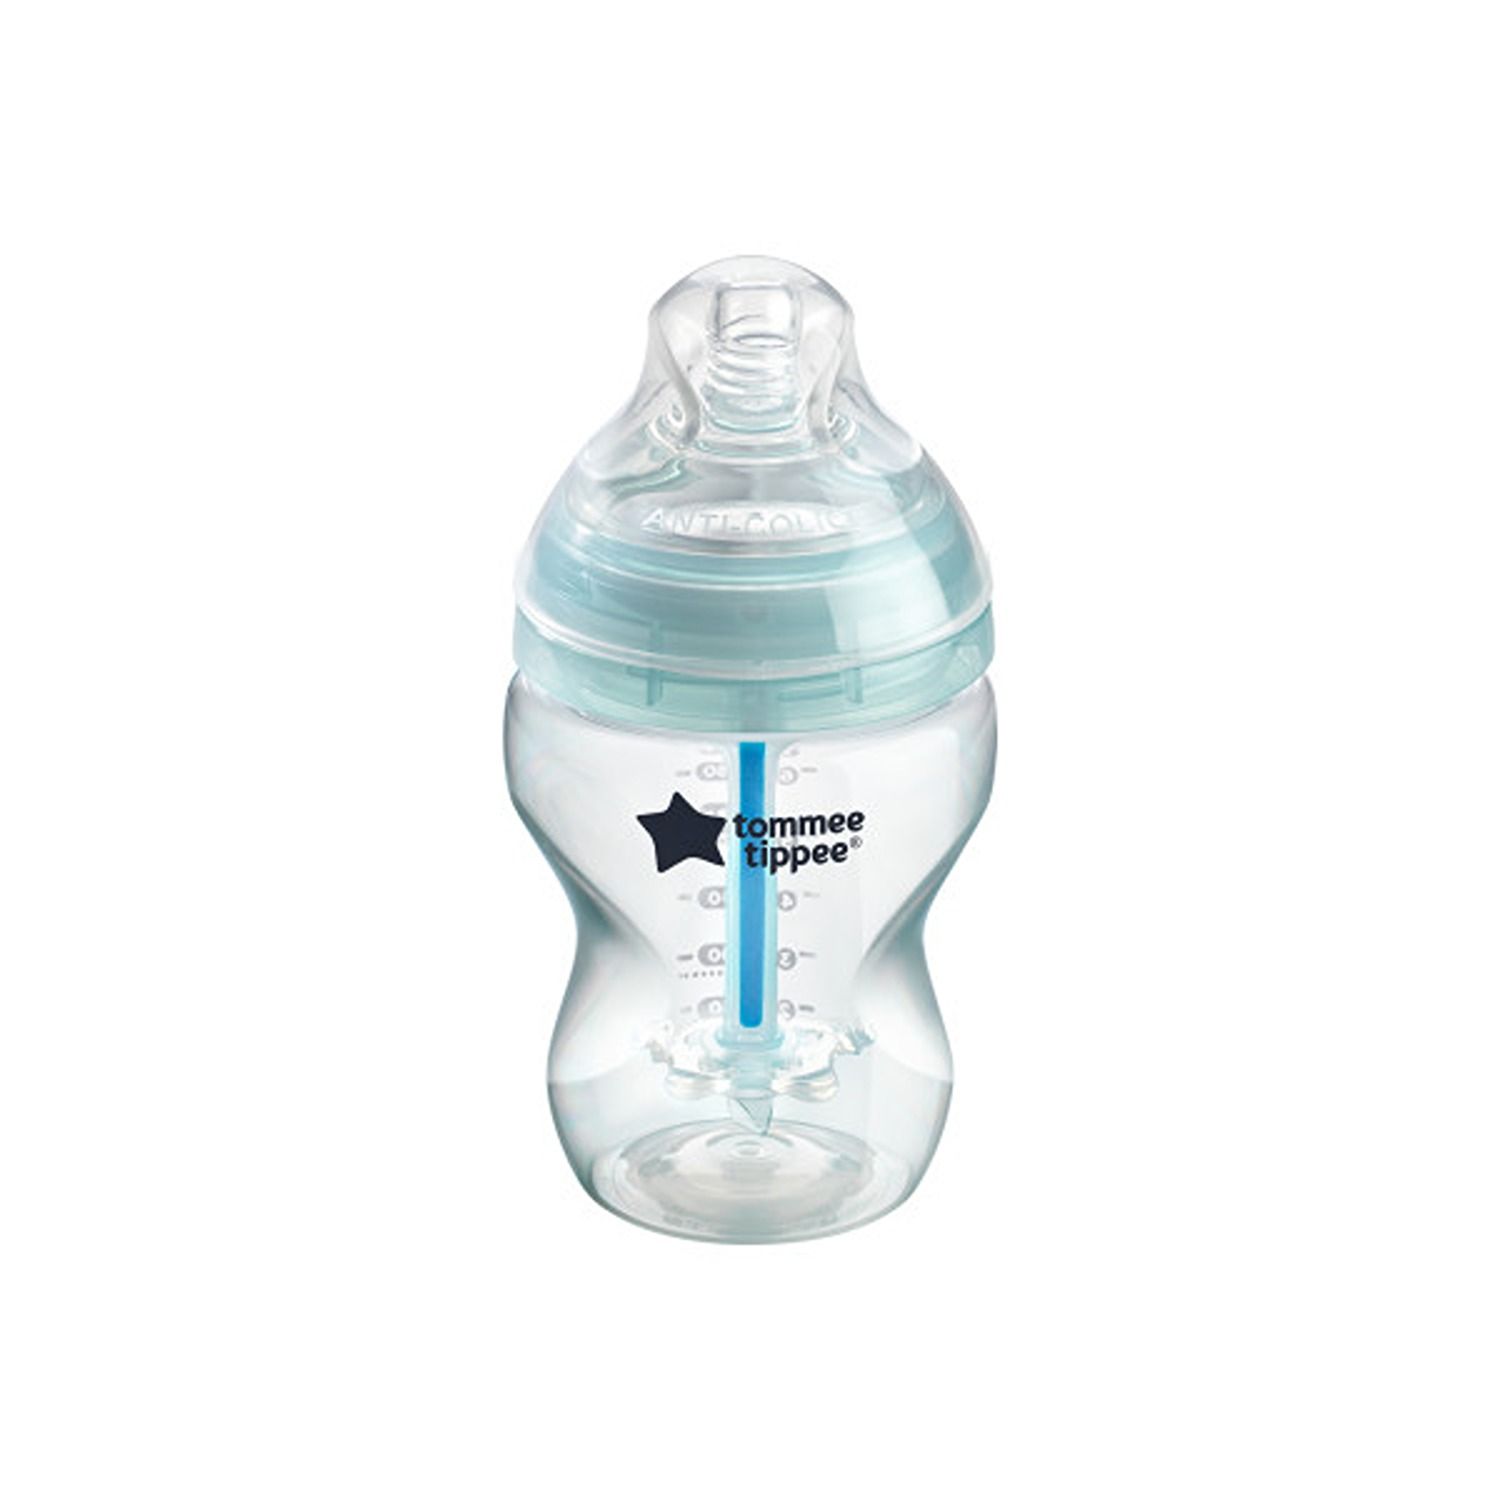 Tommee Tippee - Advanced Anti-Colic Bottle, 260ml - Teal